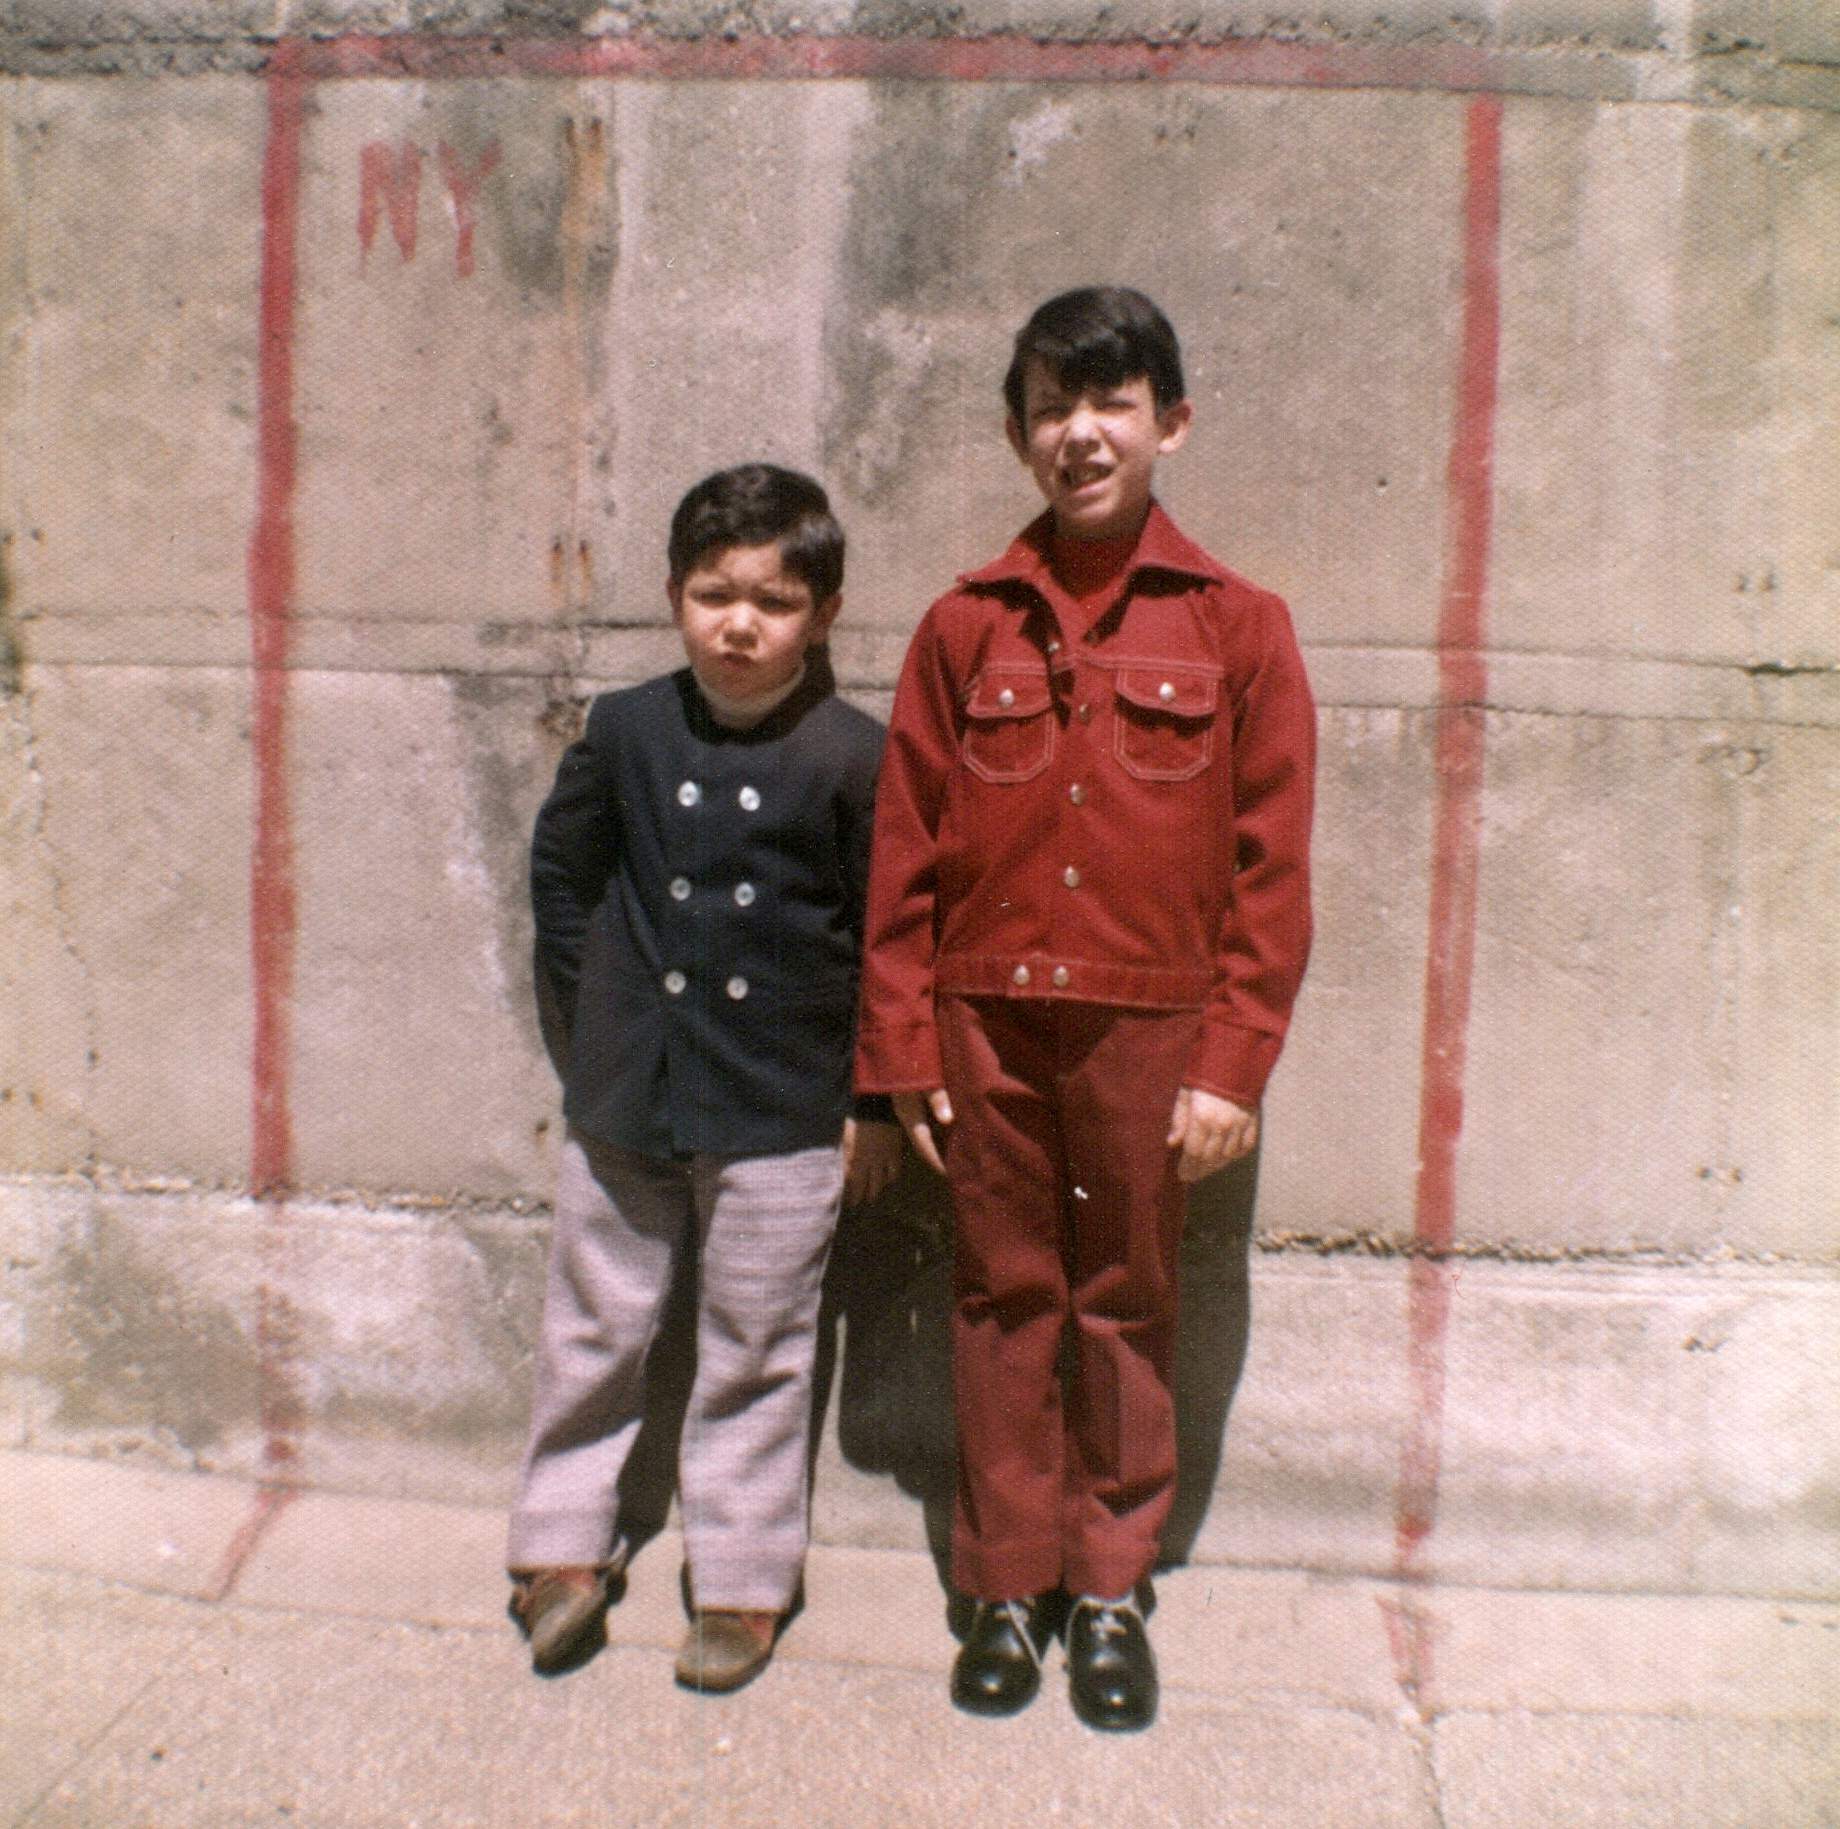 Two young boys in 1970s-style clothes, the smaller one on the left, pose for a photo standing against a wall.